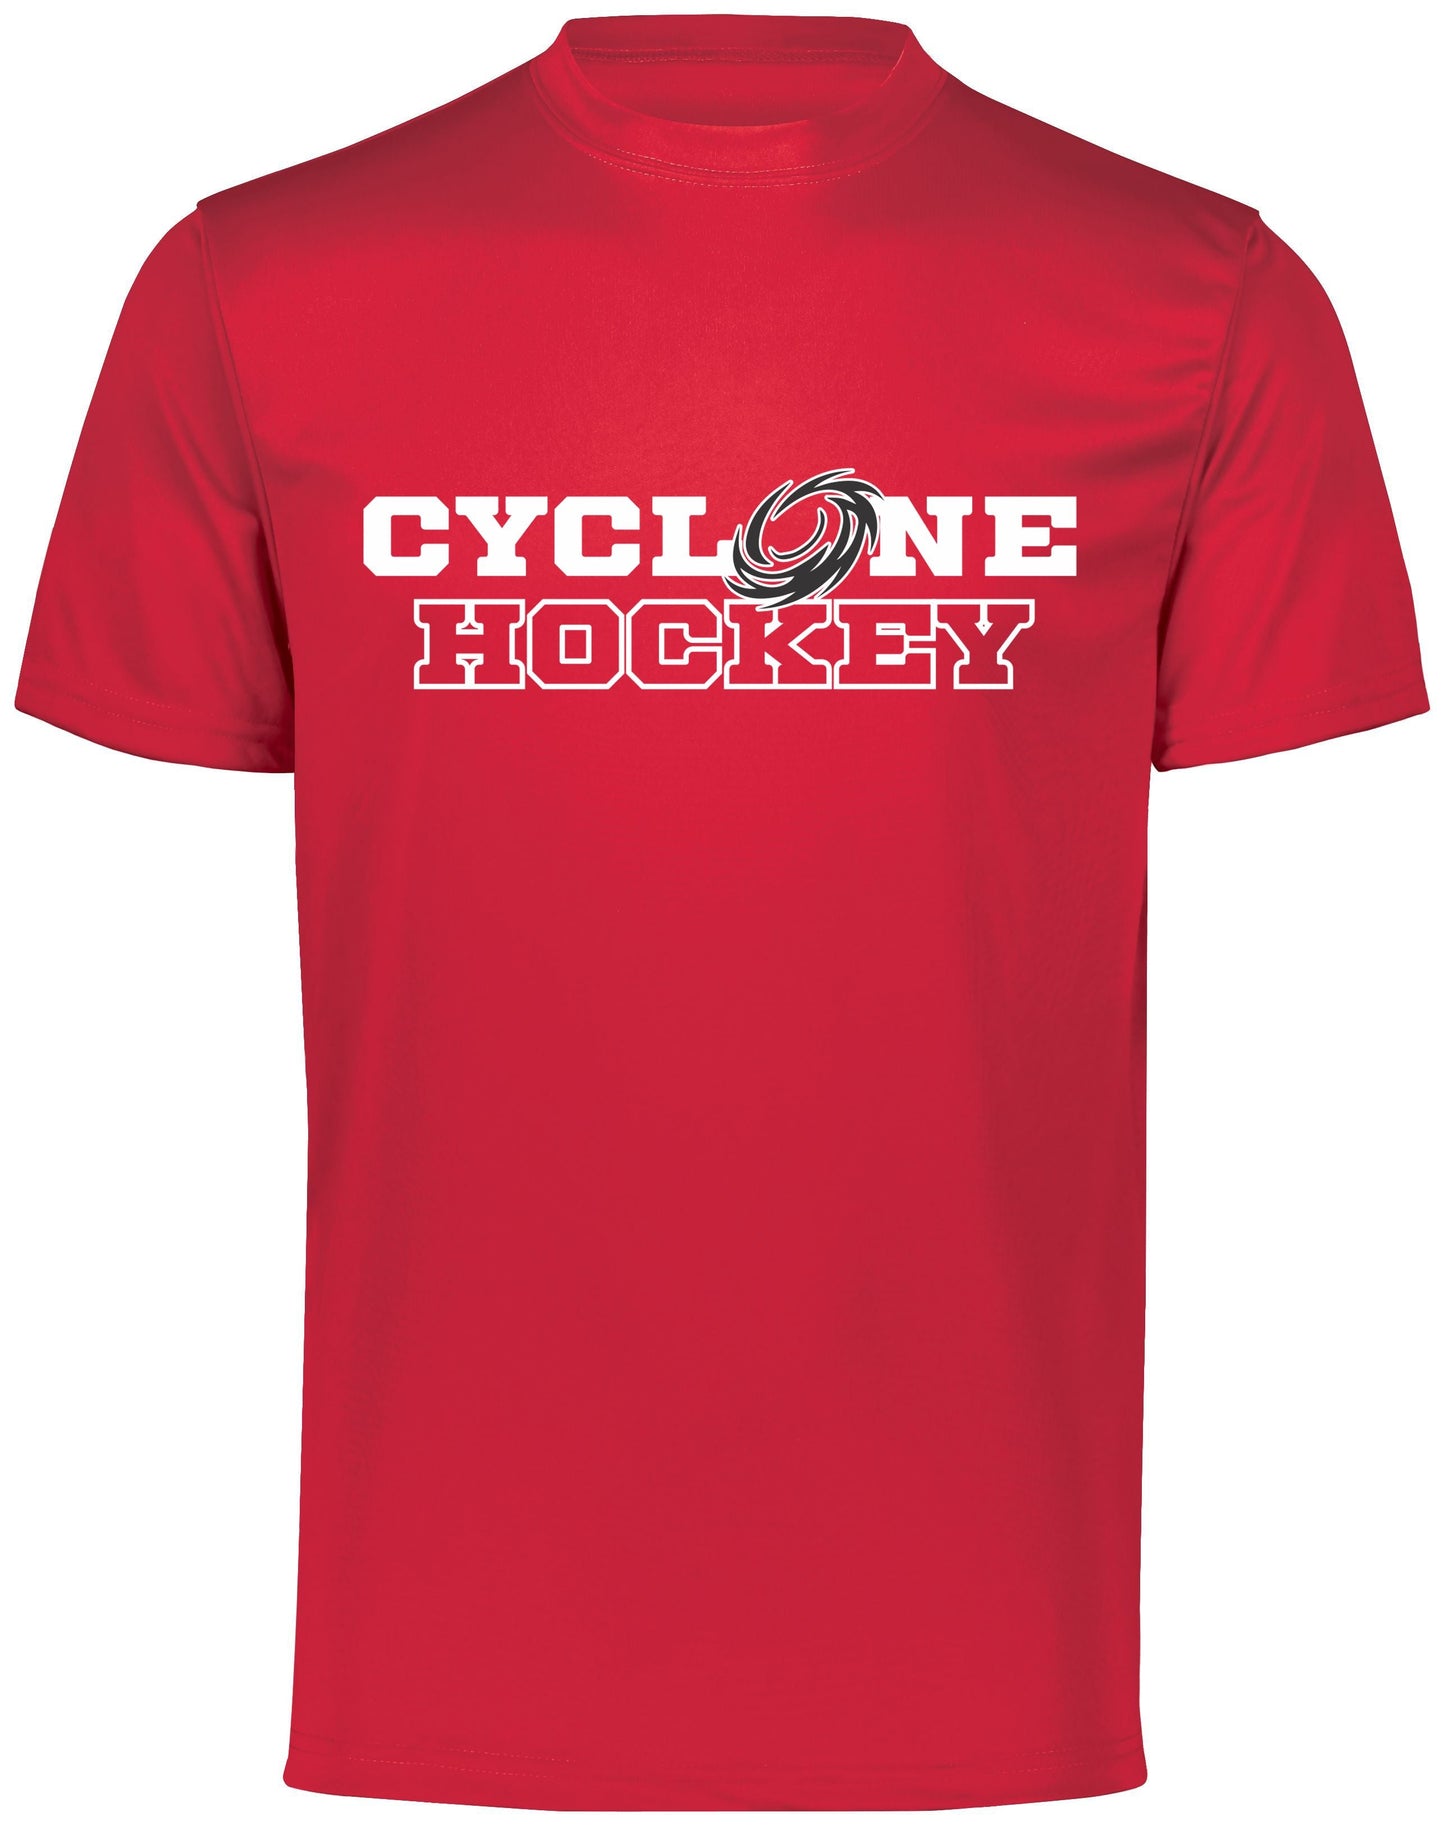 Youth Cyclones Wicking Tee